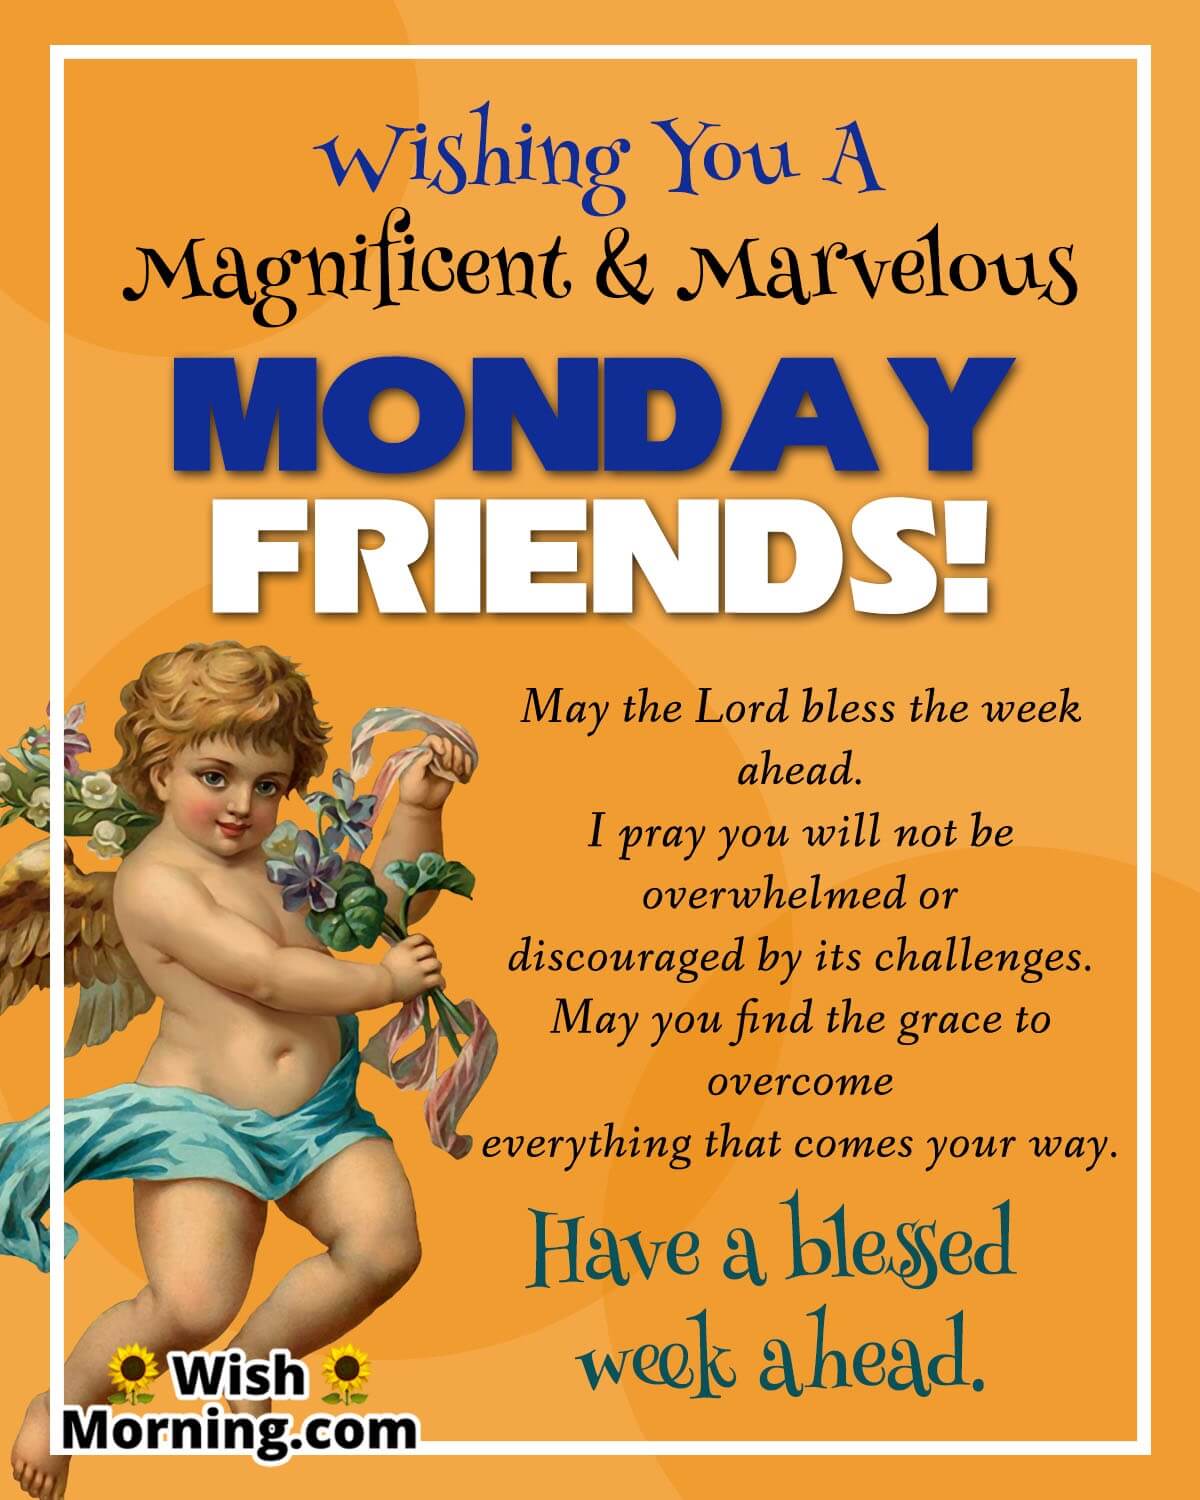 Wishing You A Magnificent & Marvelous Monday